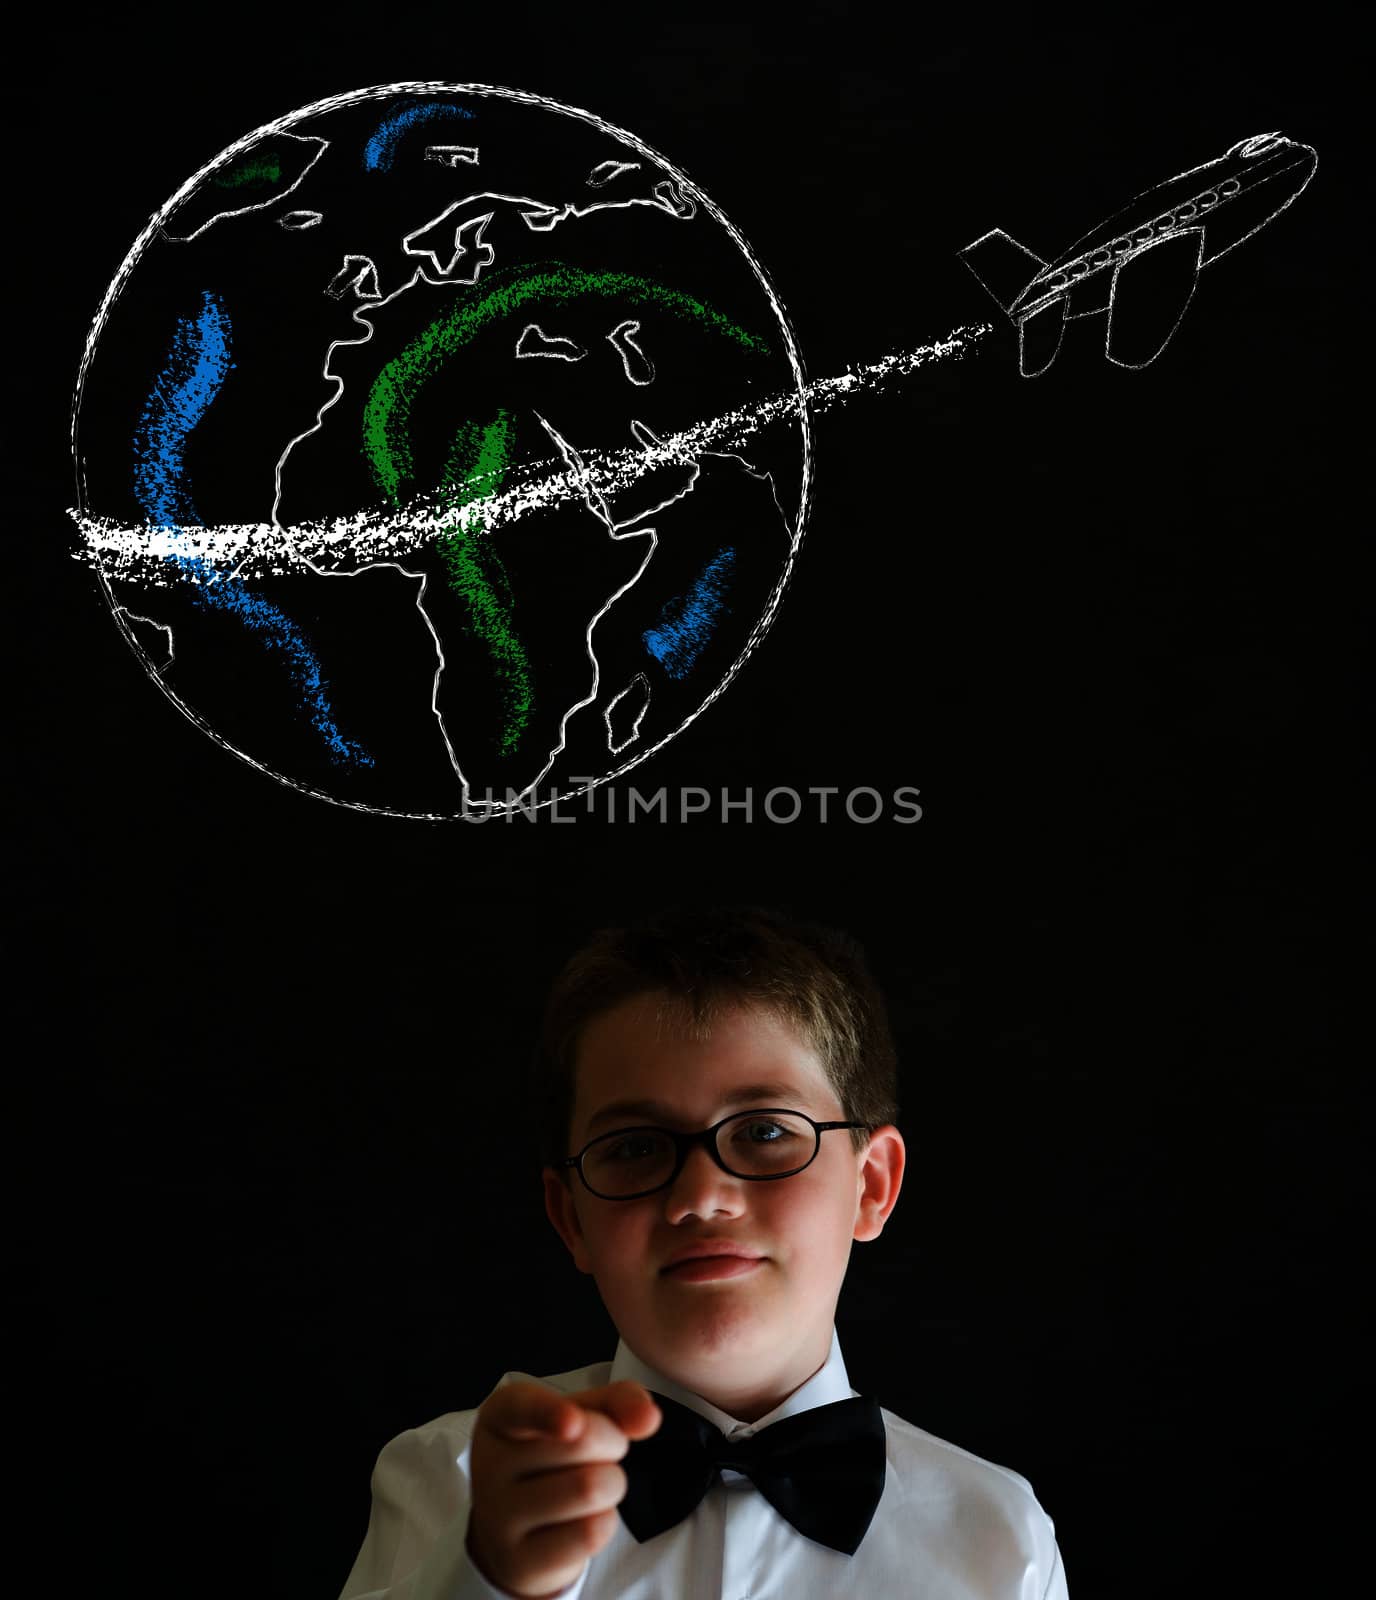 Education needs you thinking boy dressed up as business man with chalk globe and jet world travel on blackboard background